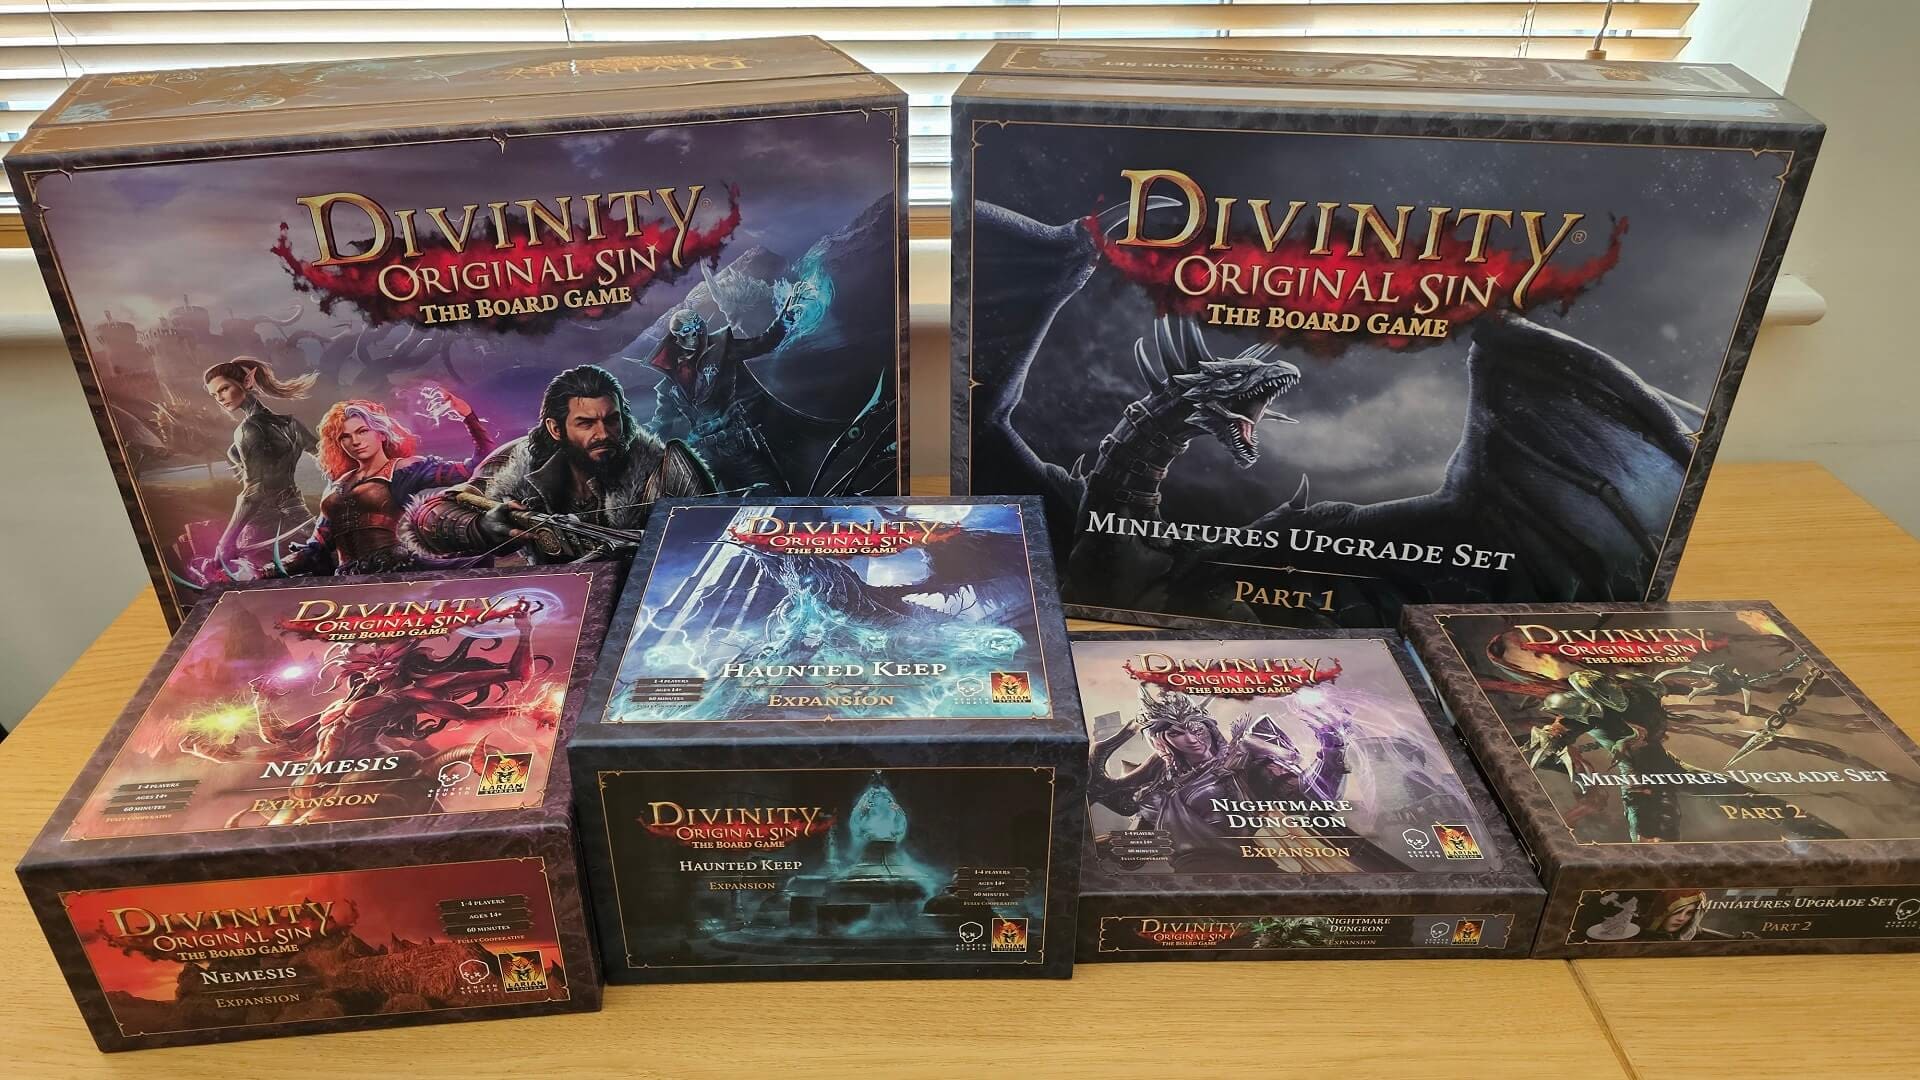 Divinity: Original Sin The Board Game Expansions Showcase